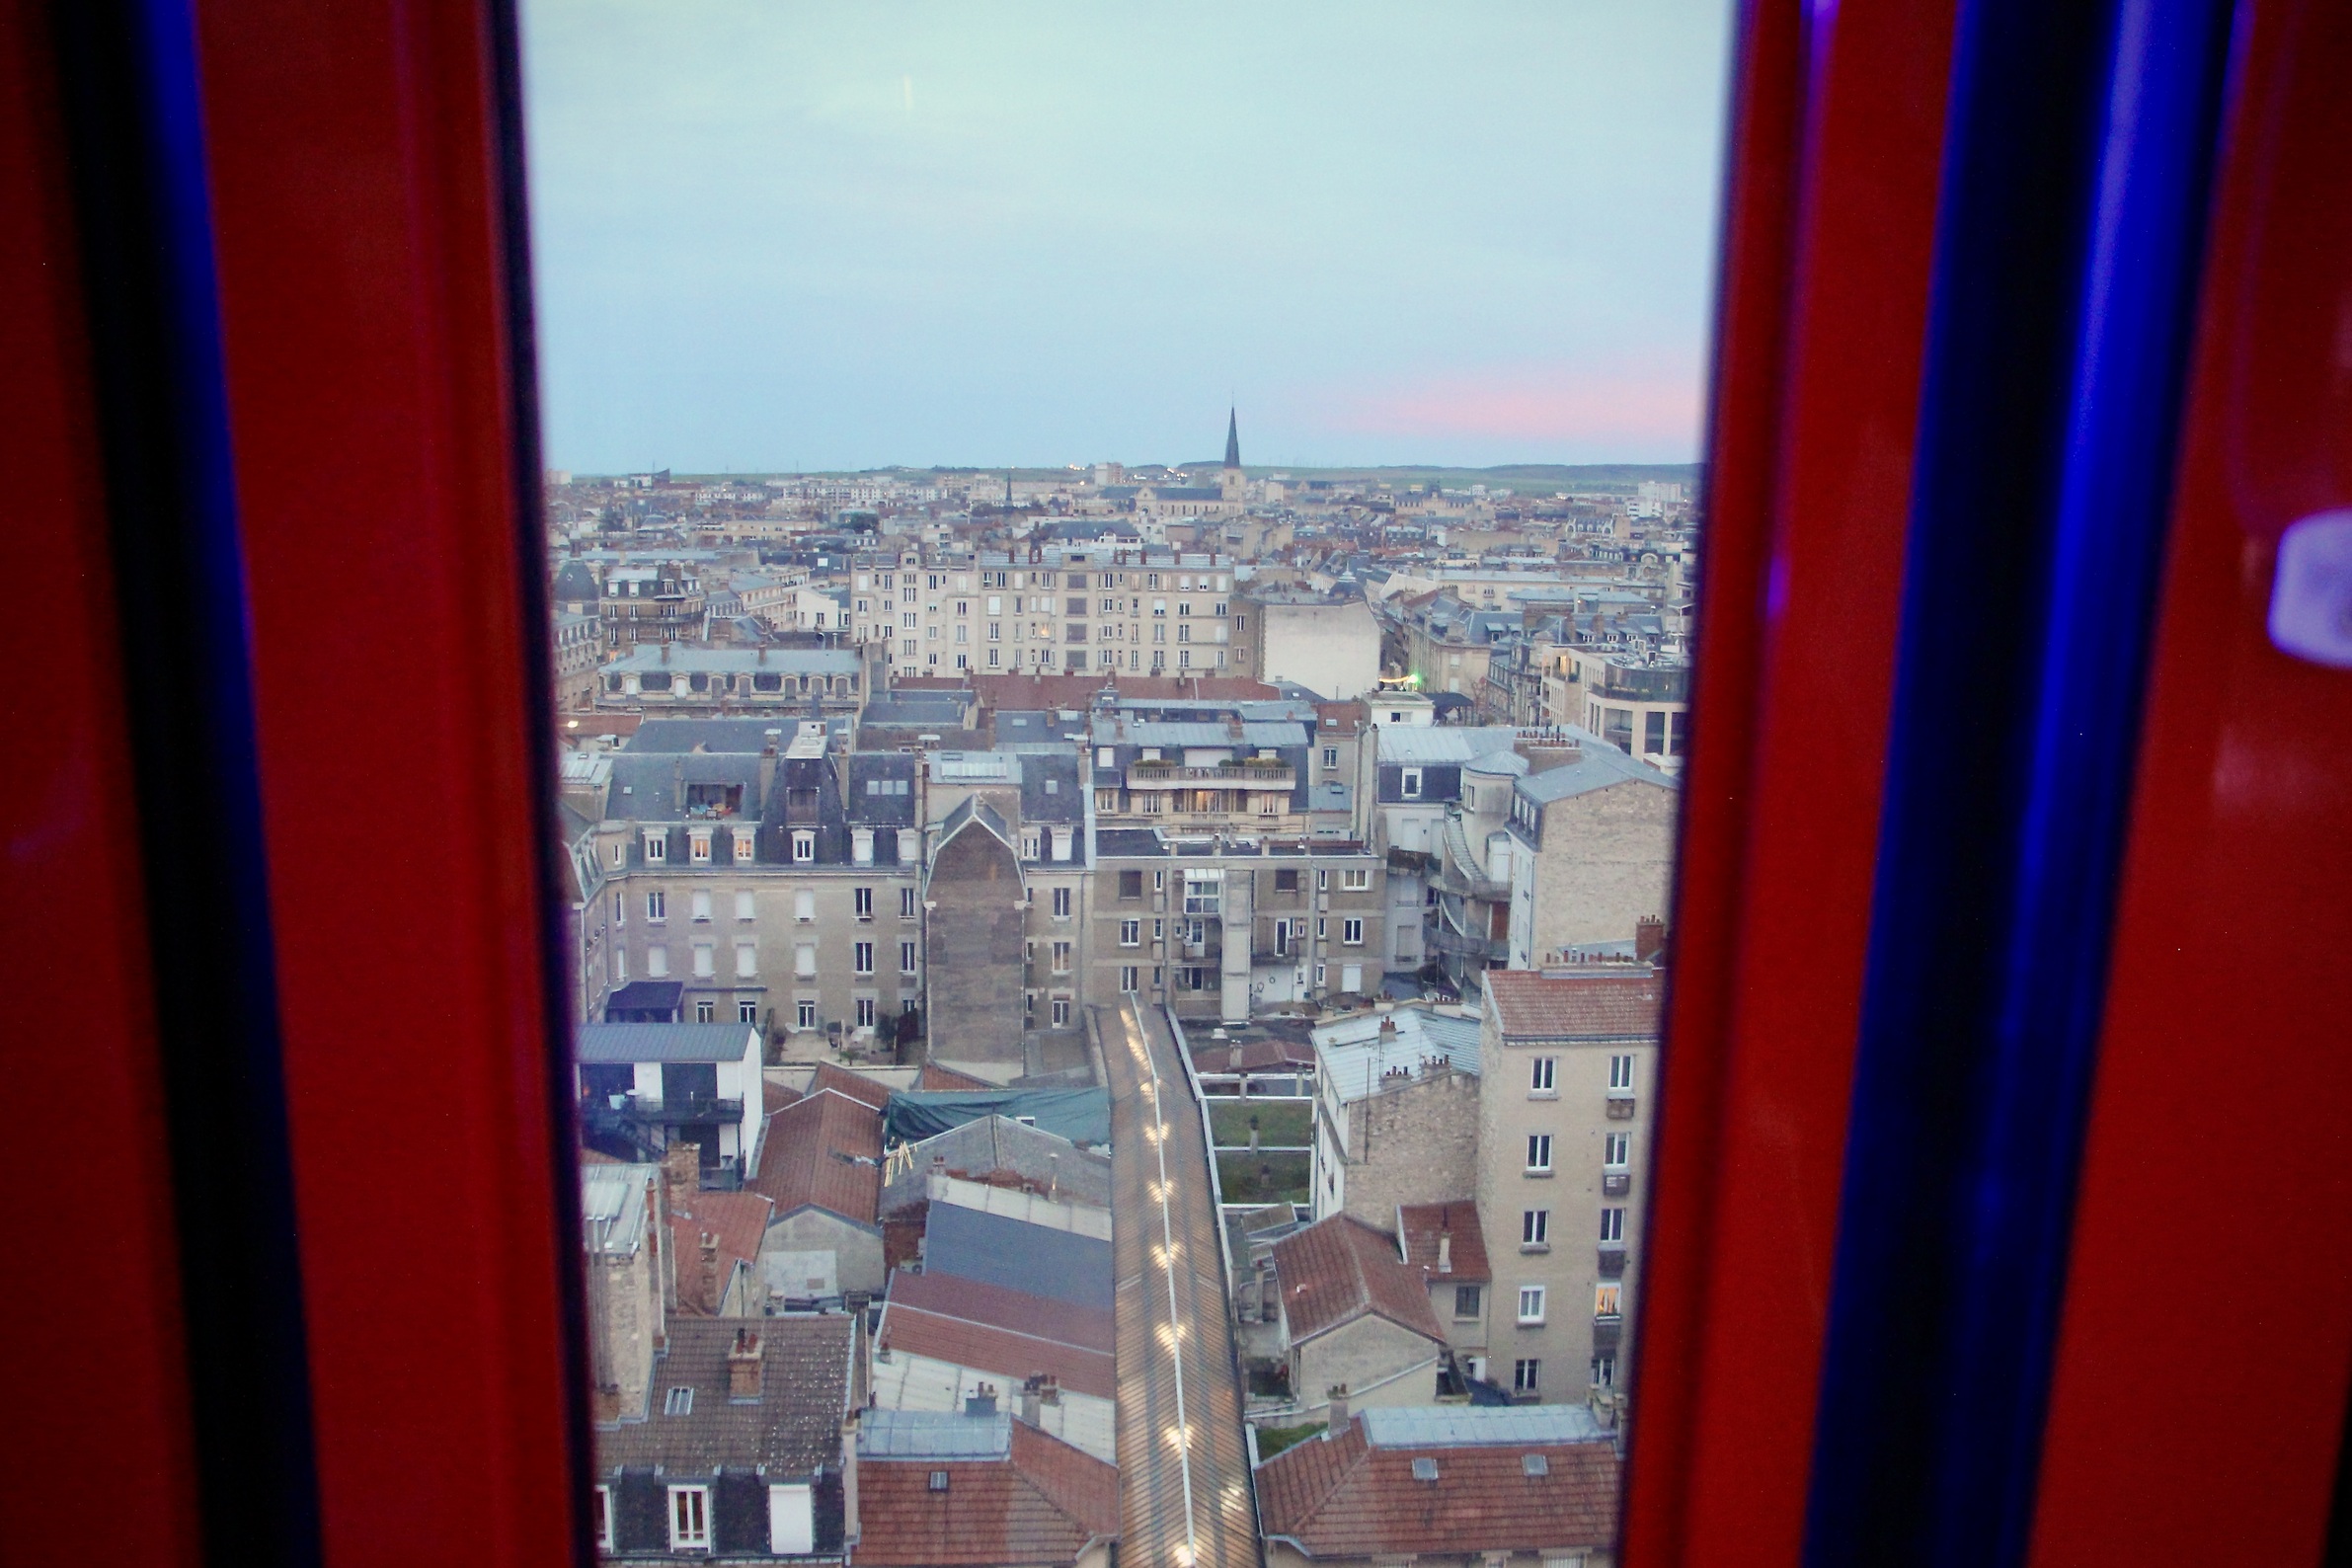 An aerial view of Reims, France from a cabin on the ferris wheel.